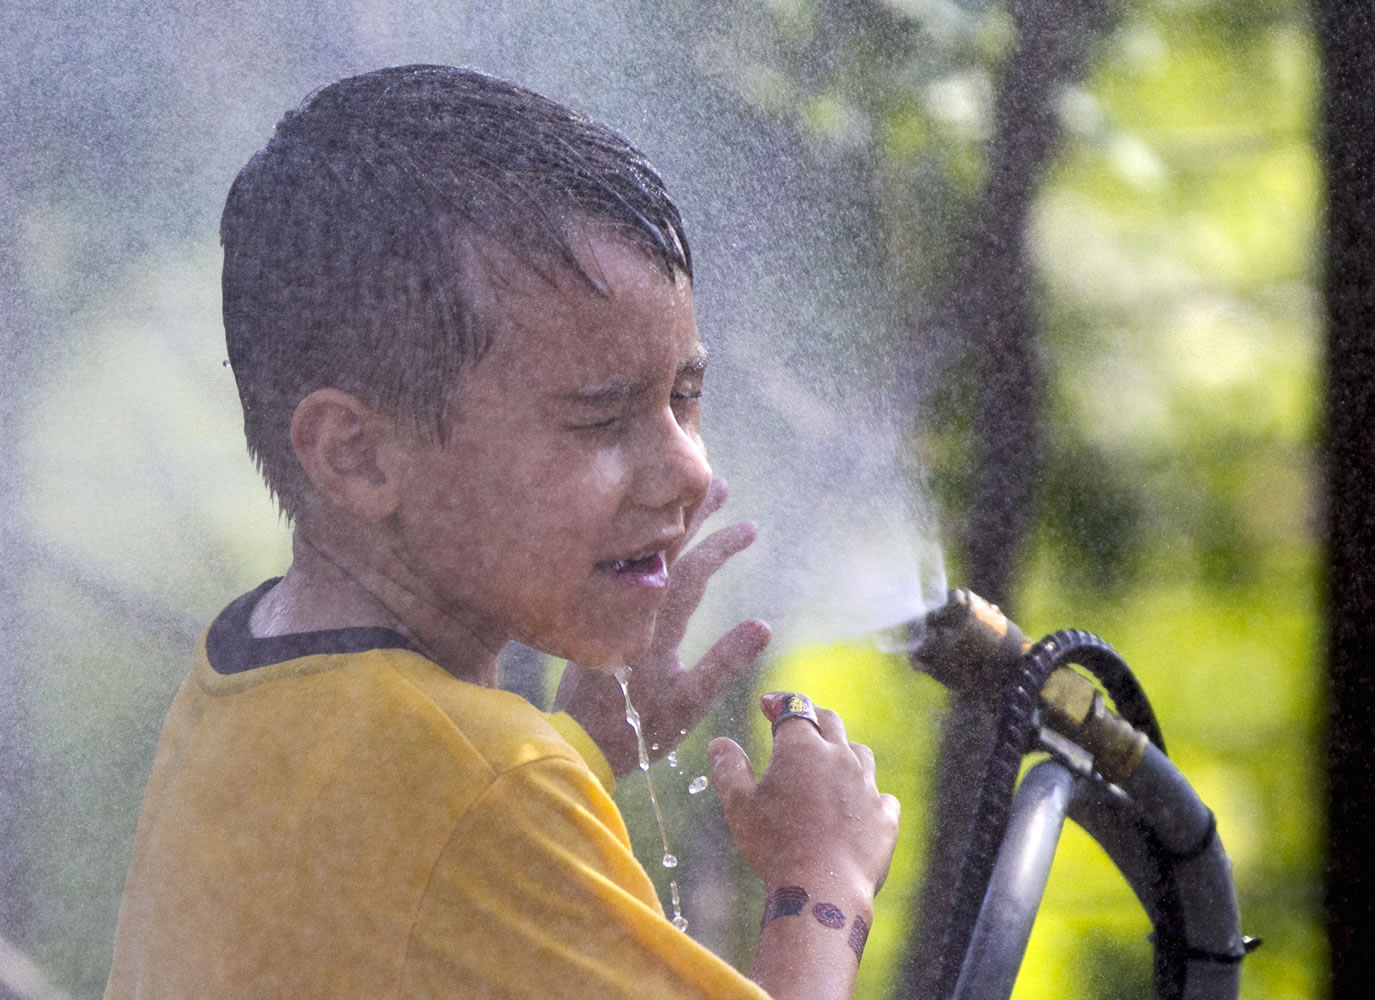 Six-year-old Alexander Merrill of Sioux Falls, S.D., cools off in a cloud of mist at the Henry Doorly Zoo in Omaha, Neb., as temperatures reached triple digits in June.